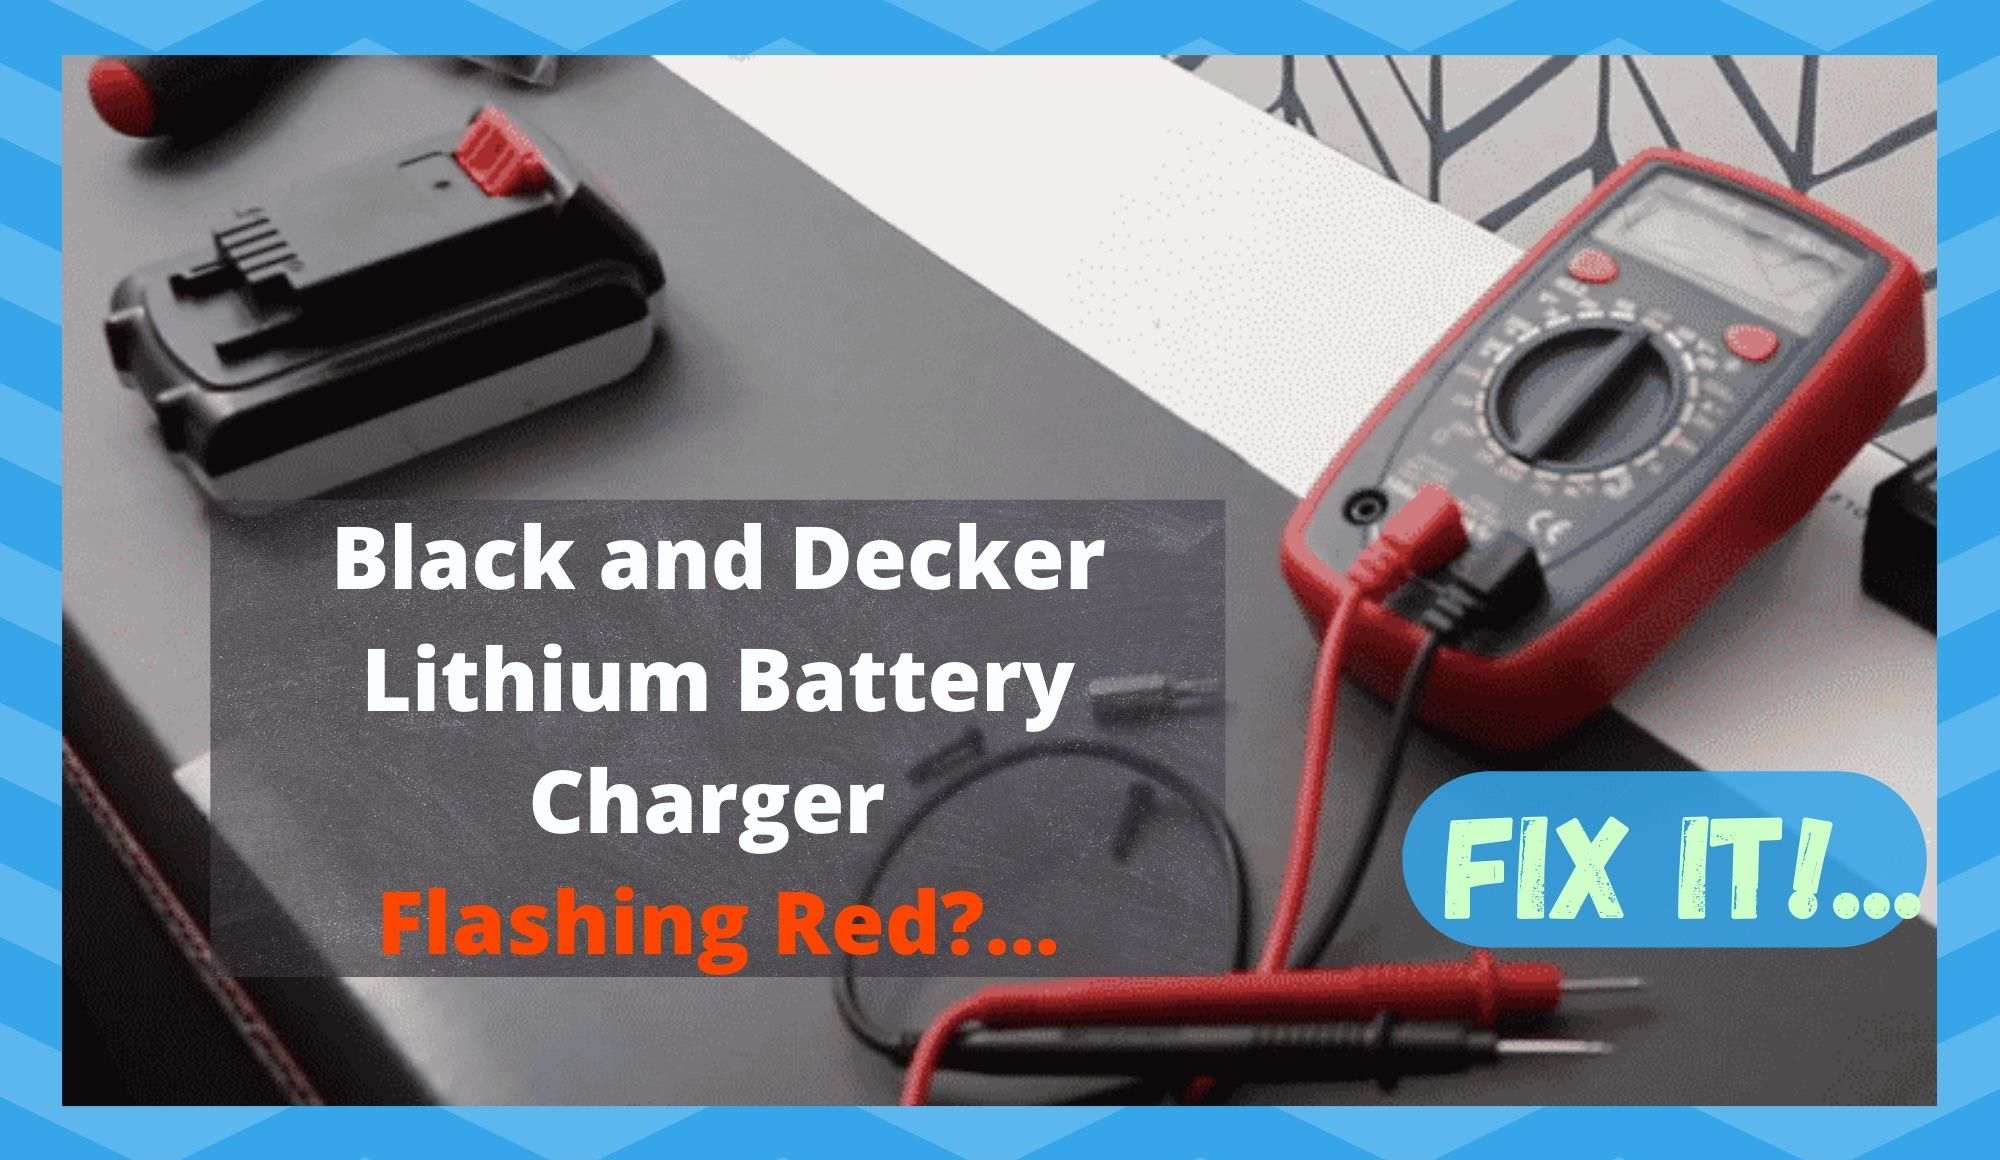 Black and Decker 36V 2.5AH lithium battery isolated on white